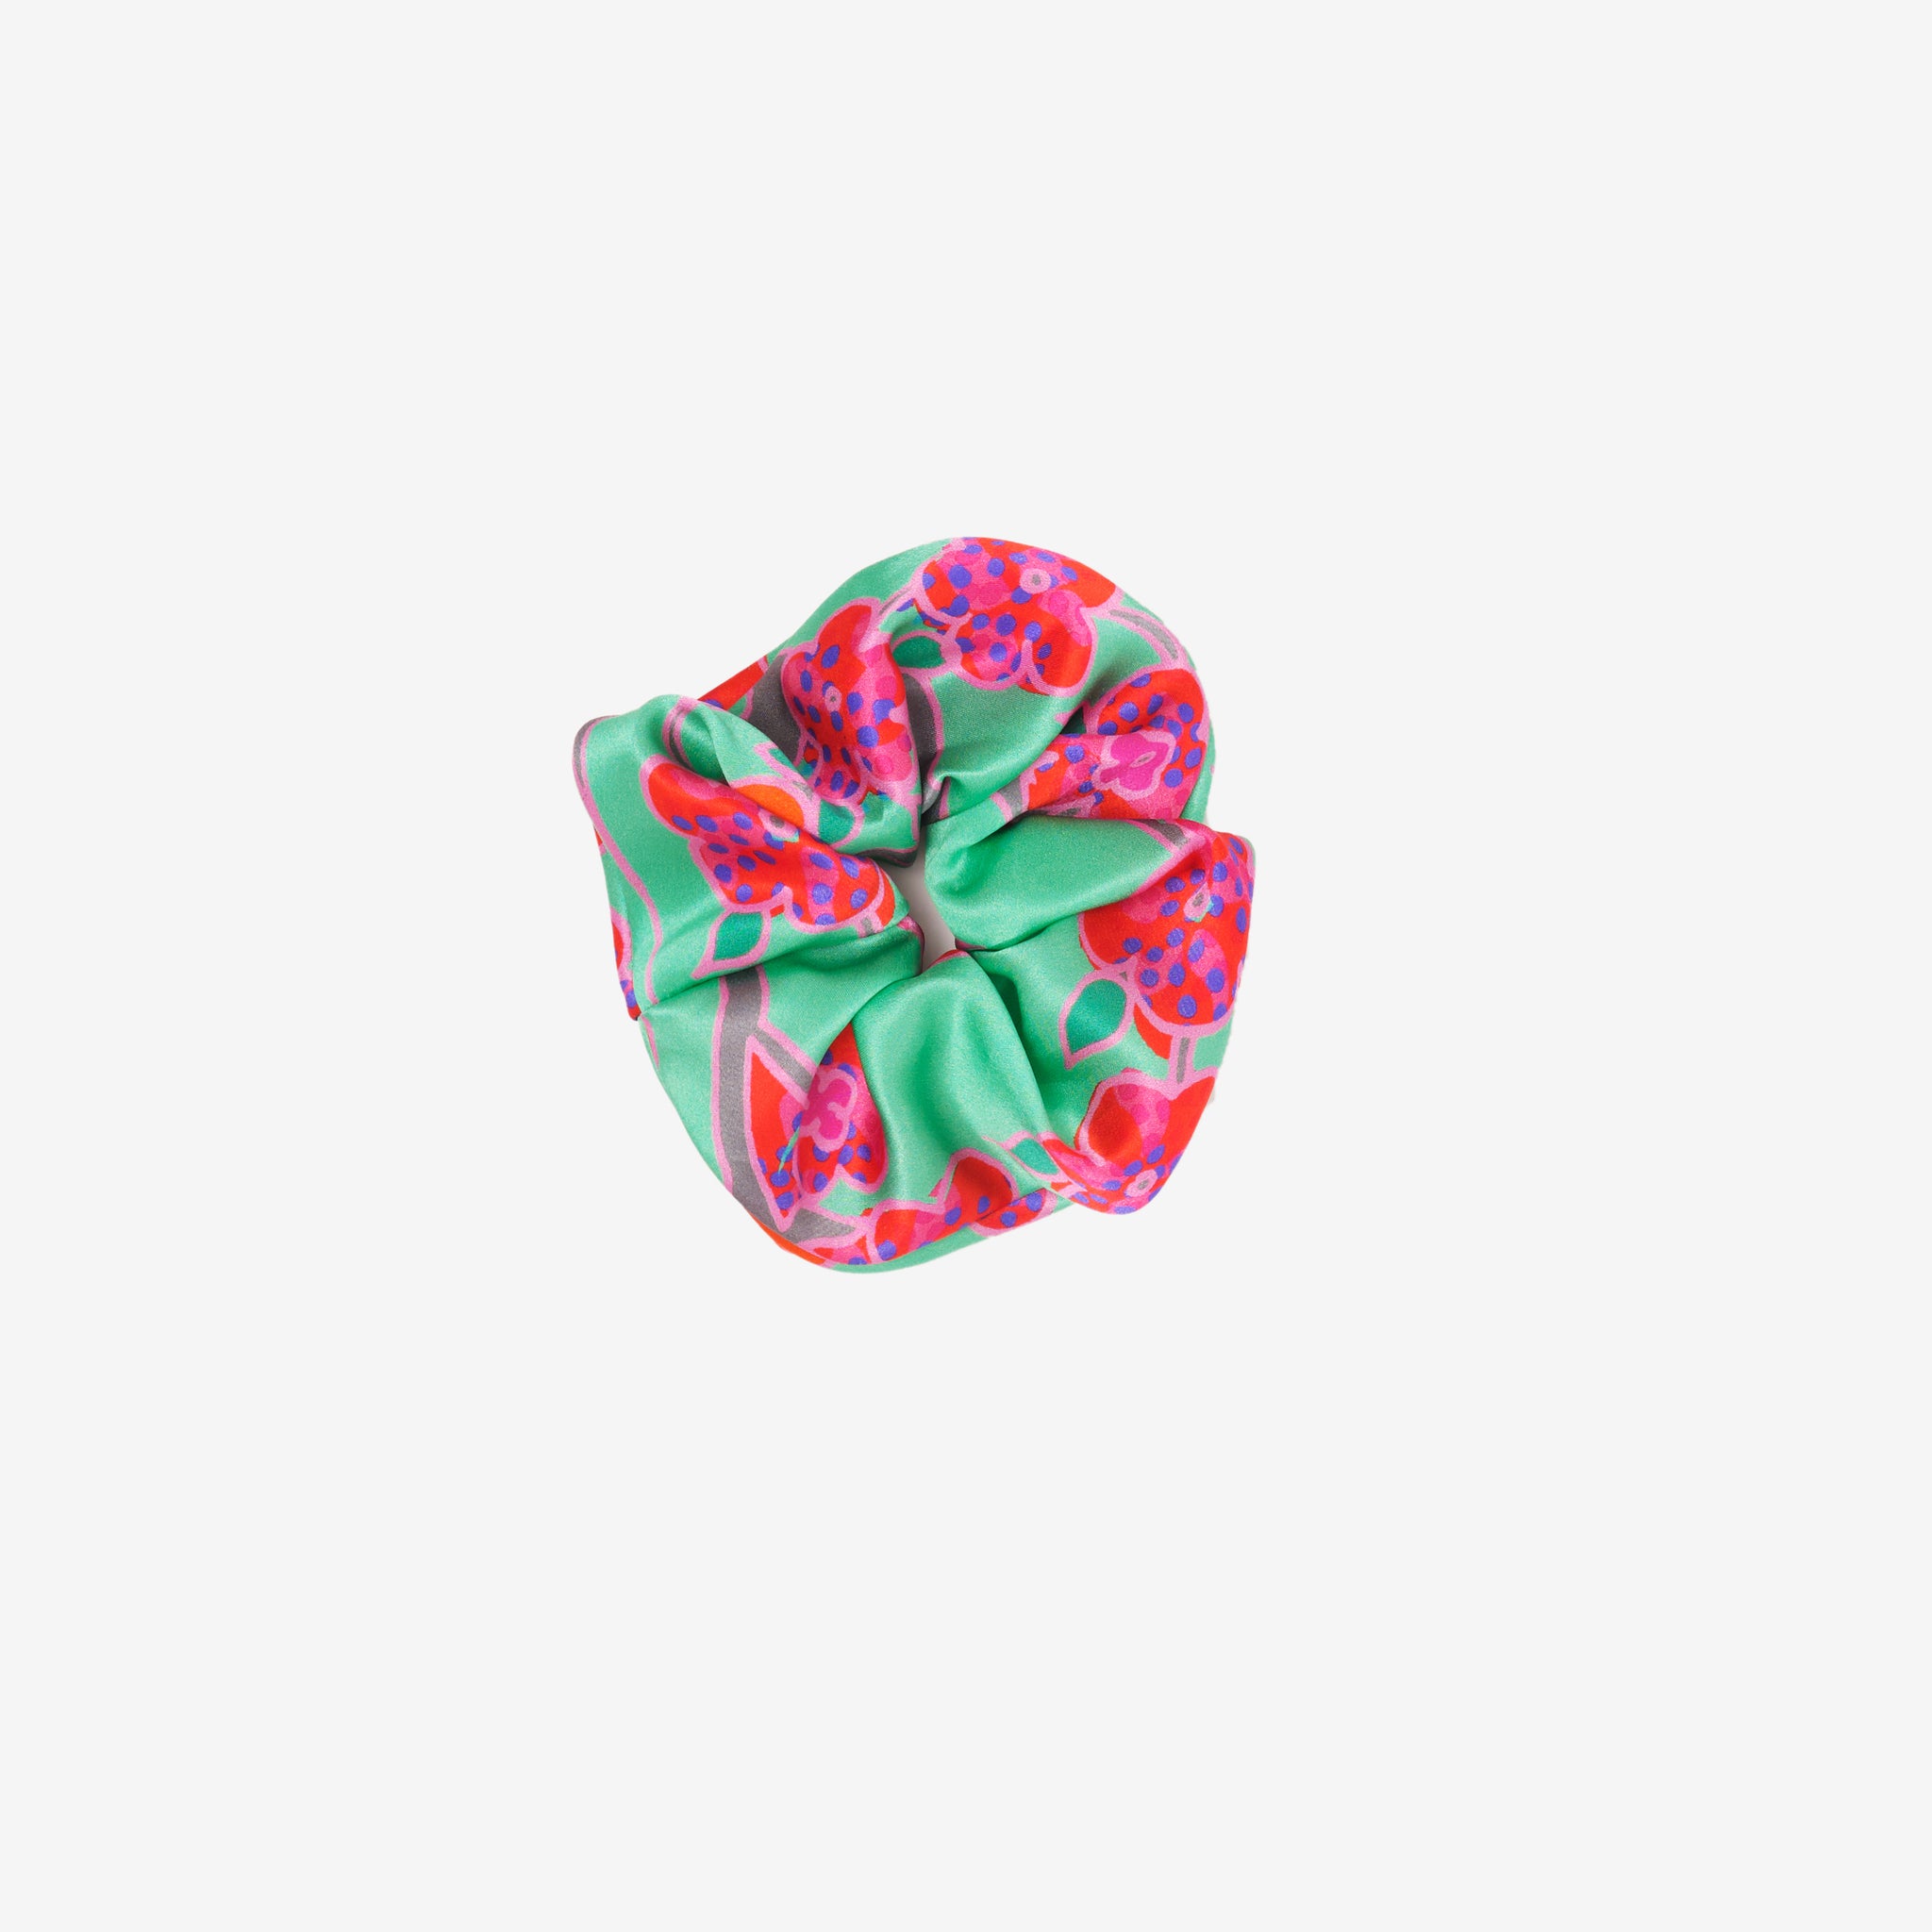 Crimson Rose scrunchie featuring hand drawn flower print from the Island Dreams collection in green, red, pink, purple and grey.